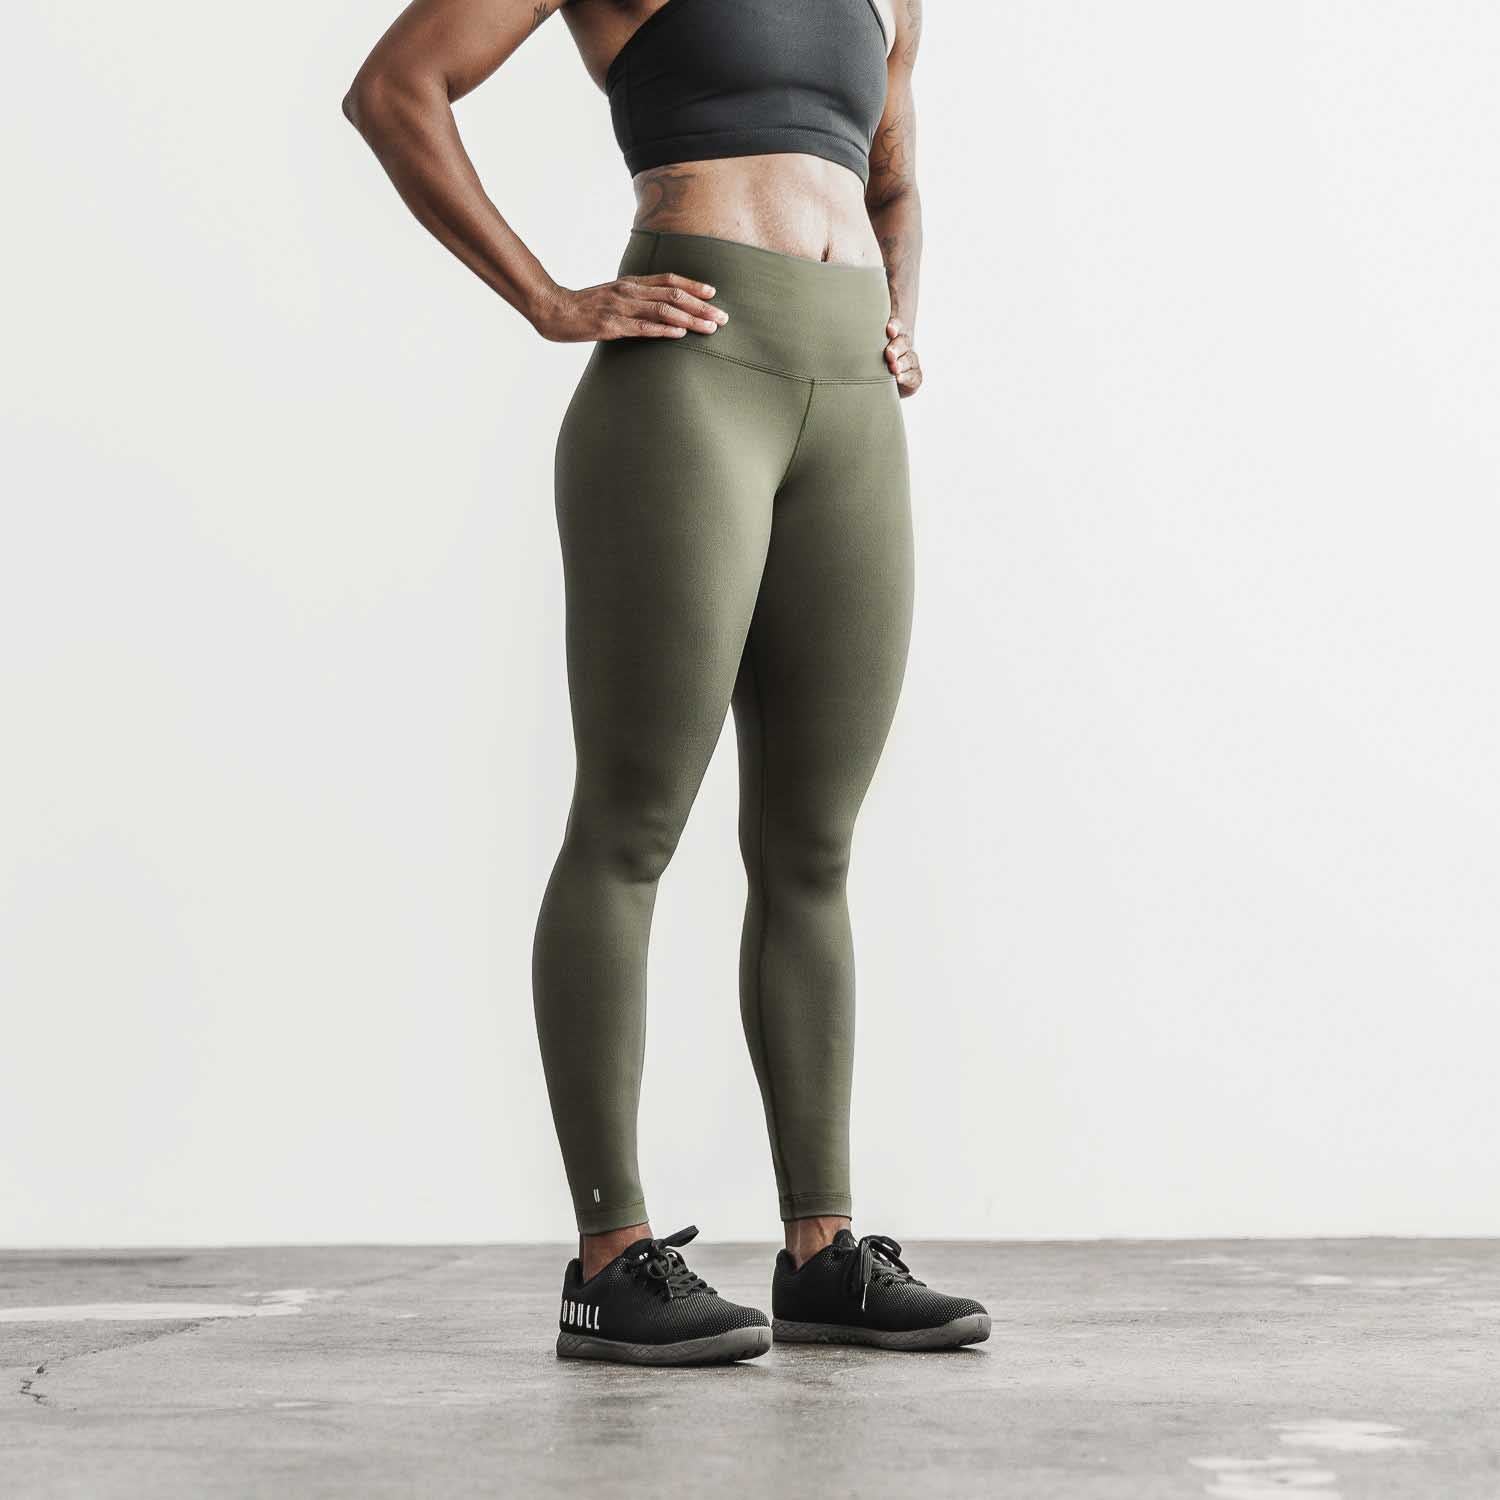 Unity High Waisted Leggings - Rifle Green – TheOutfit85